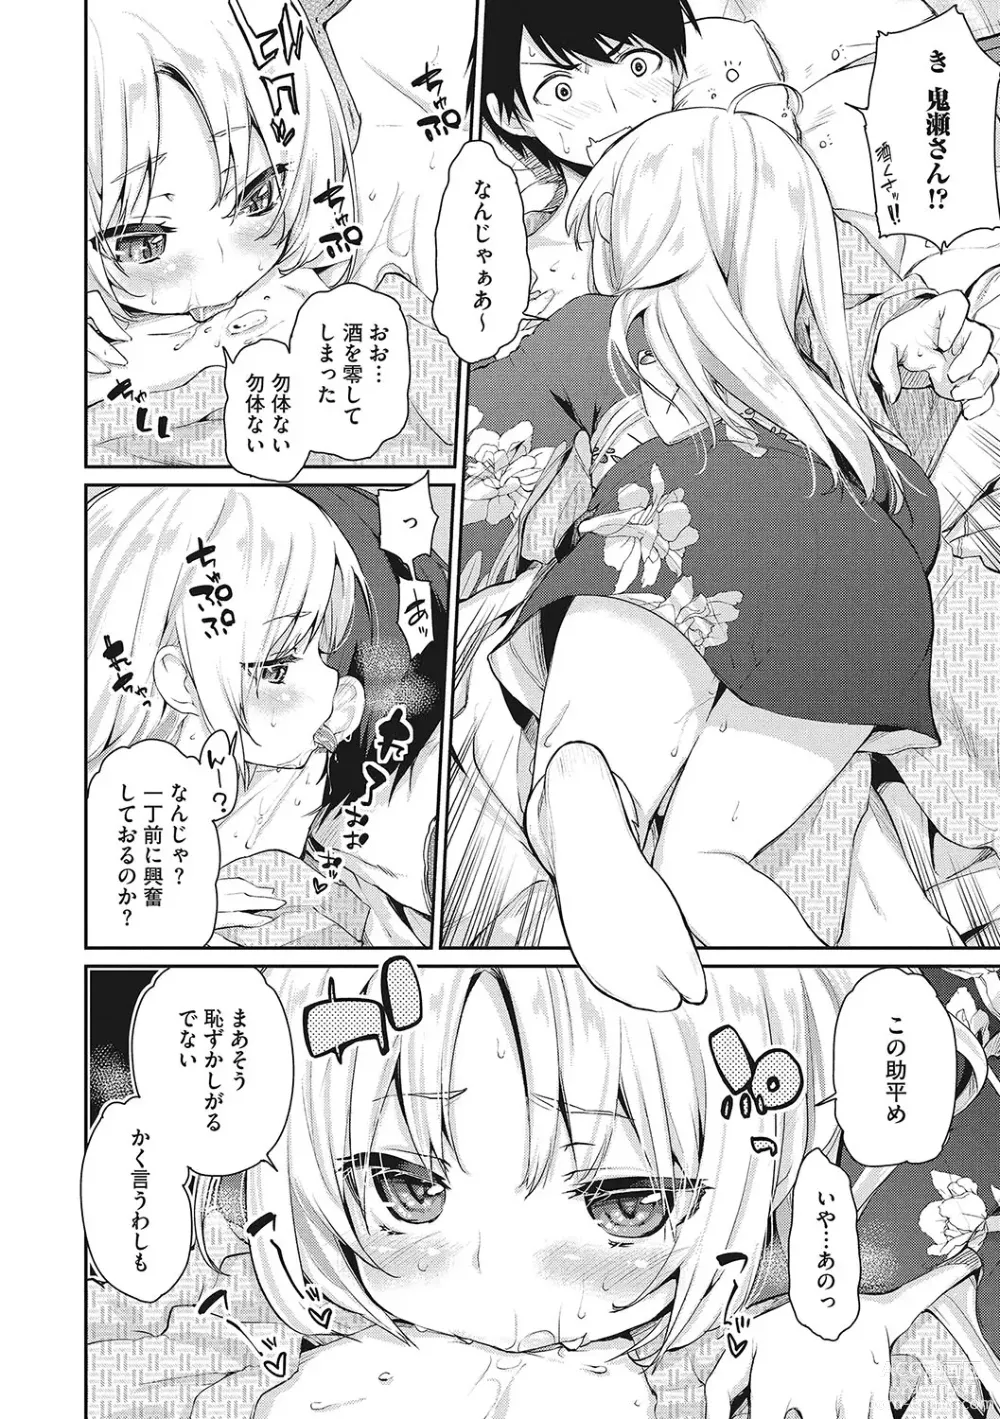 Page 15 of manga LQ -Little Queen- Vol. 54